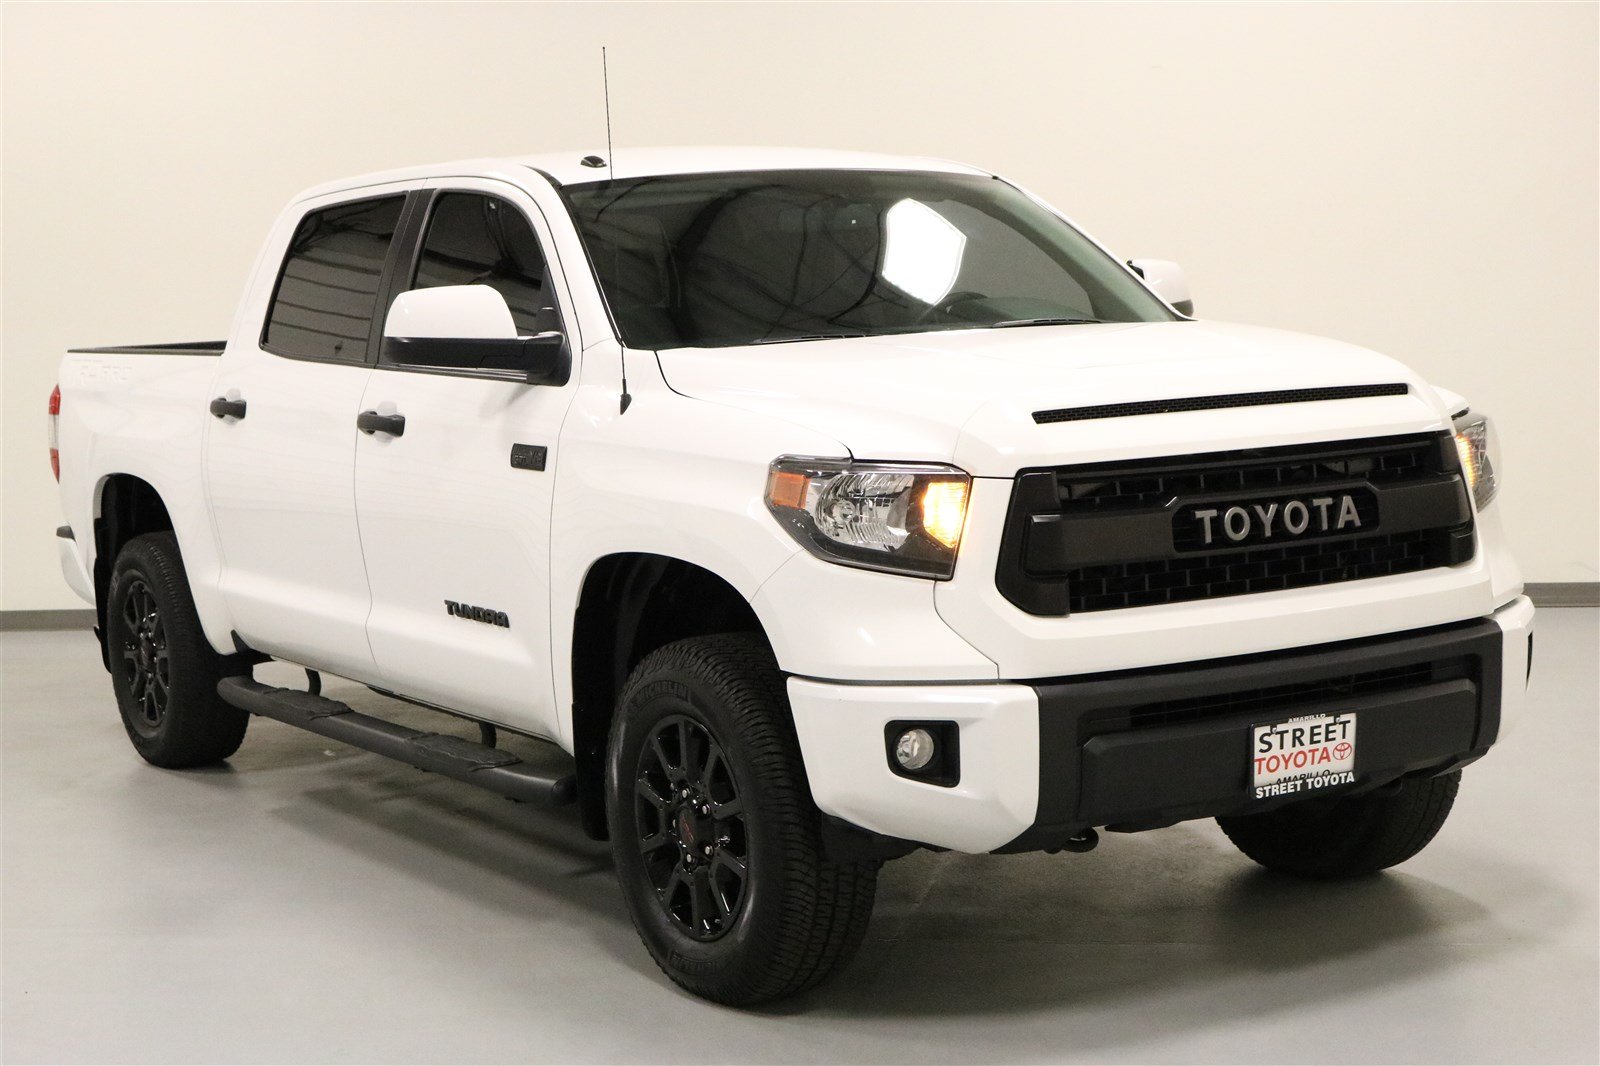 Certified Pre-Owned 2015 Toyota Tundra For Sale in Amarillo, TX | #44184